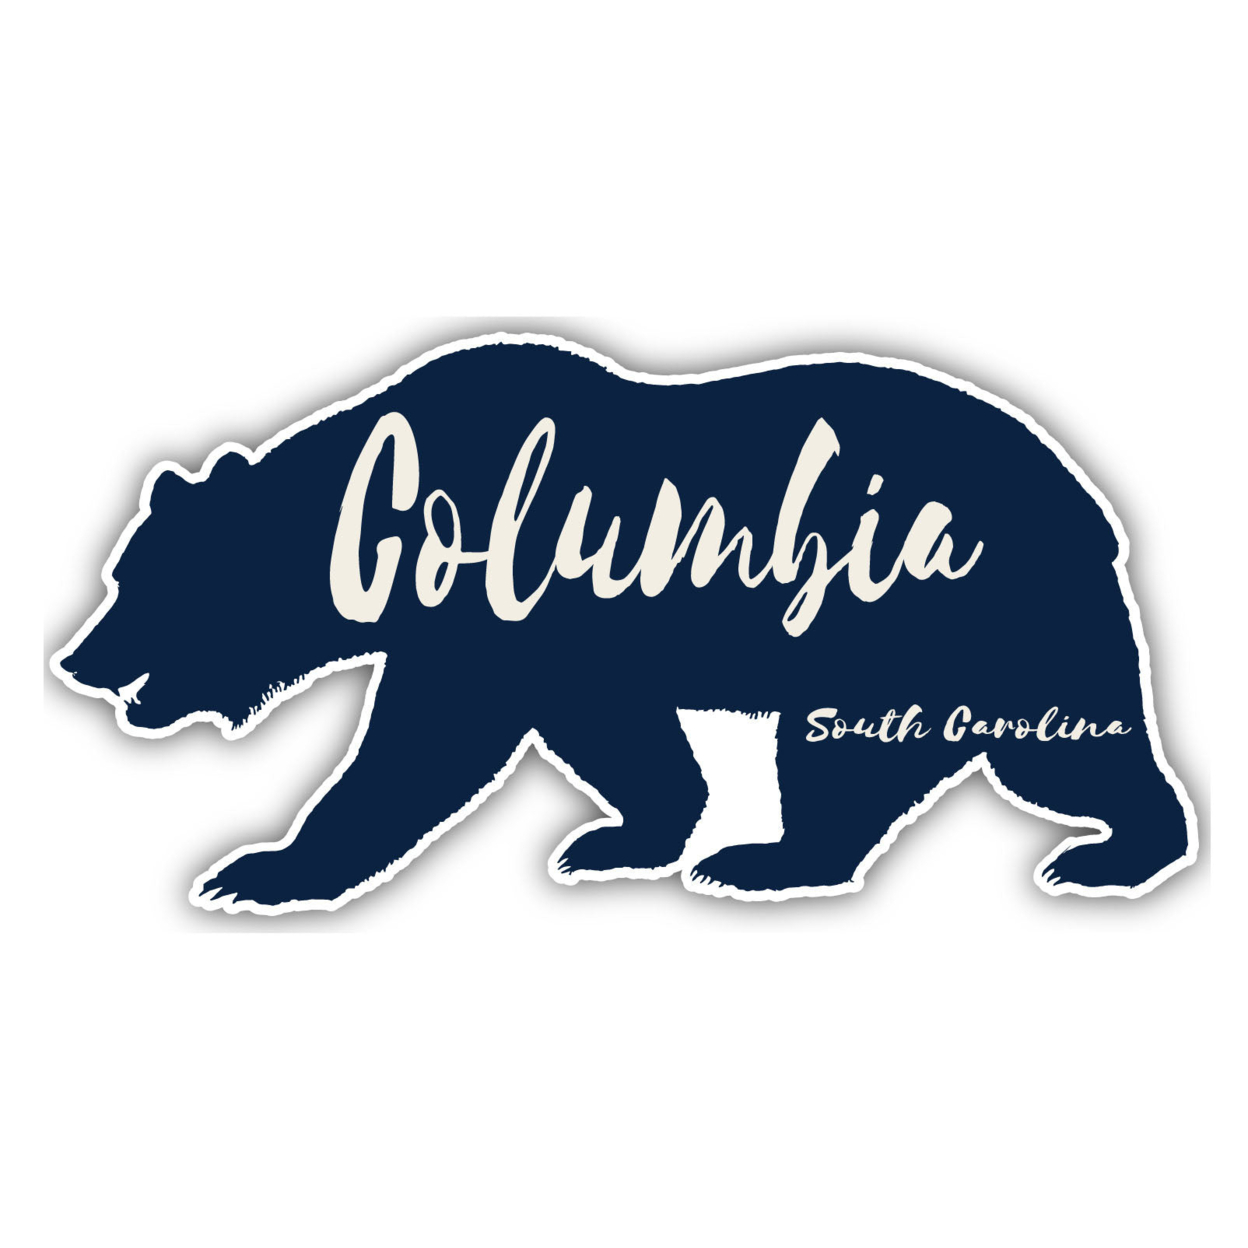 Columbia South Carolina Souvenir Decorative Stickers (Choose Theme And Size) - 4-Pack, 4-Inch, Bear